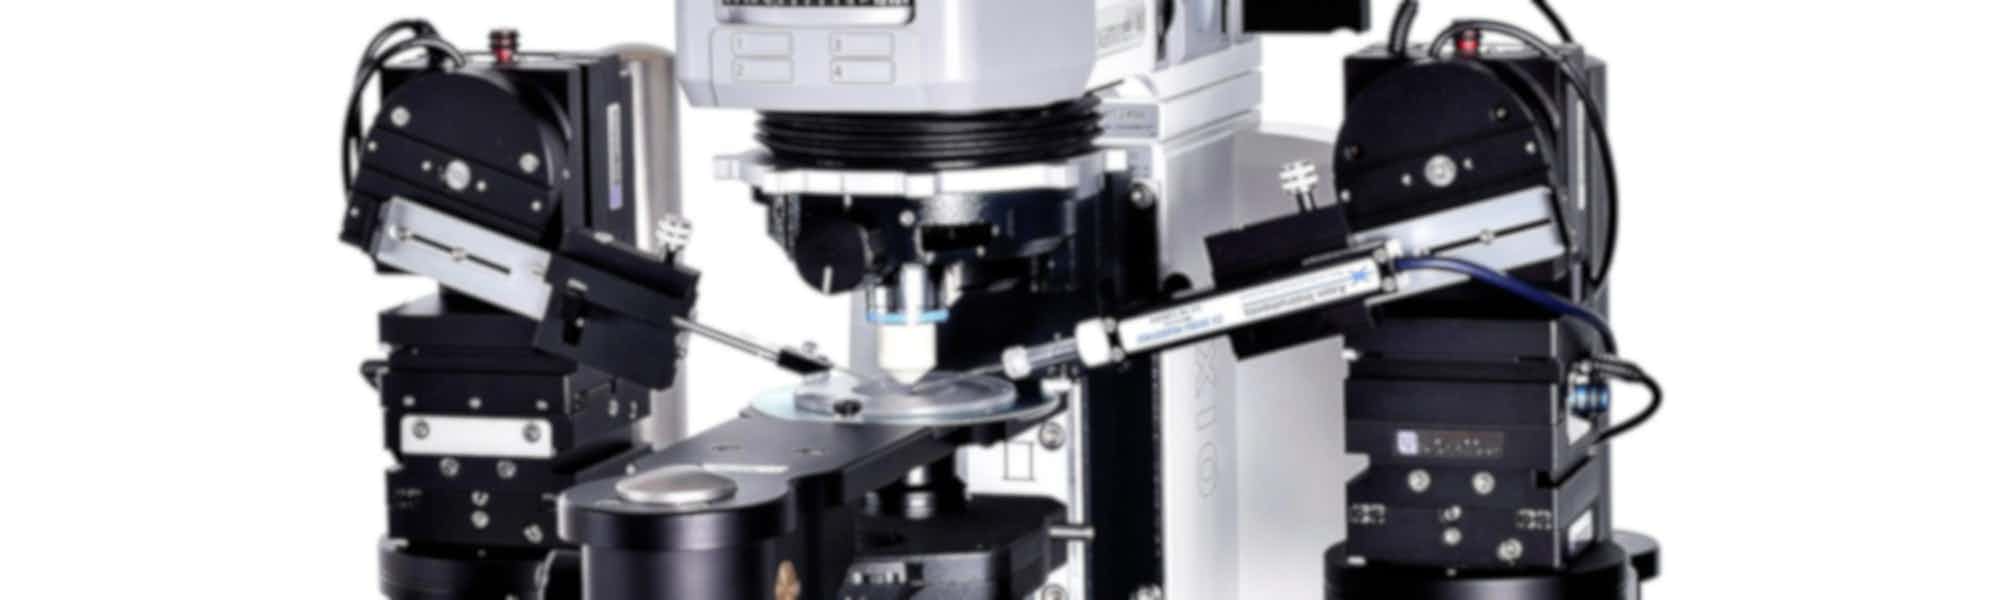 Scientifica's range of tools and equipment for confocal microscopy.